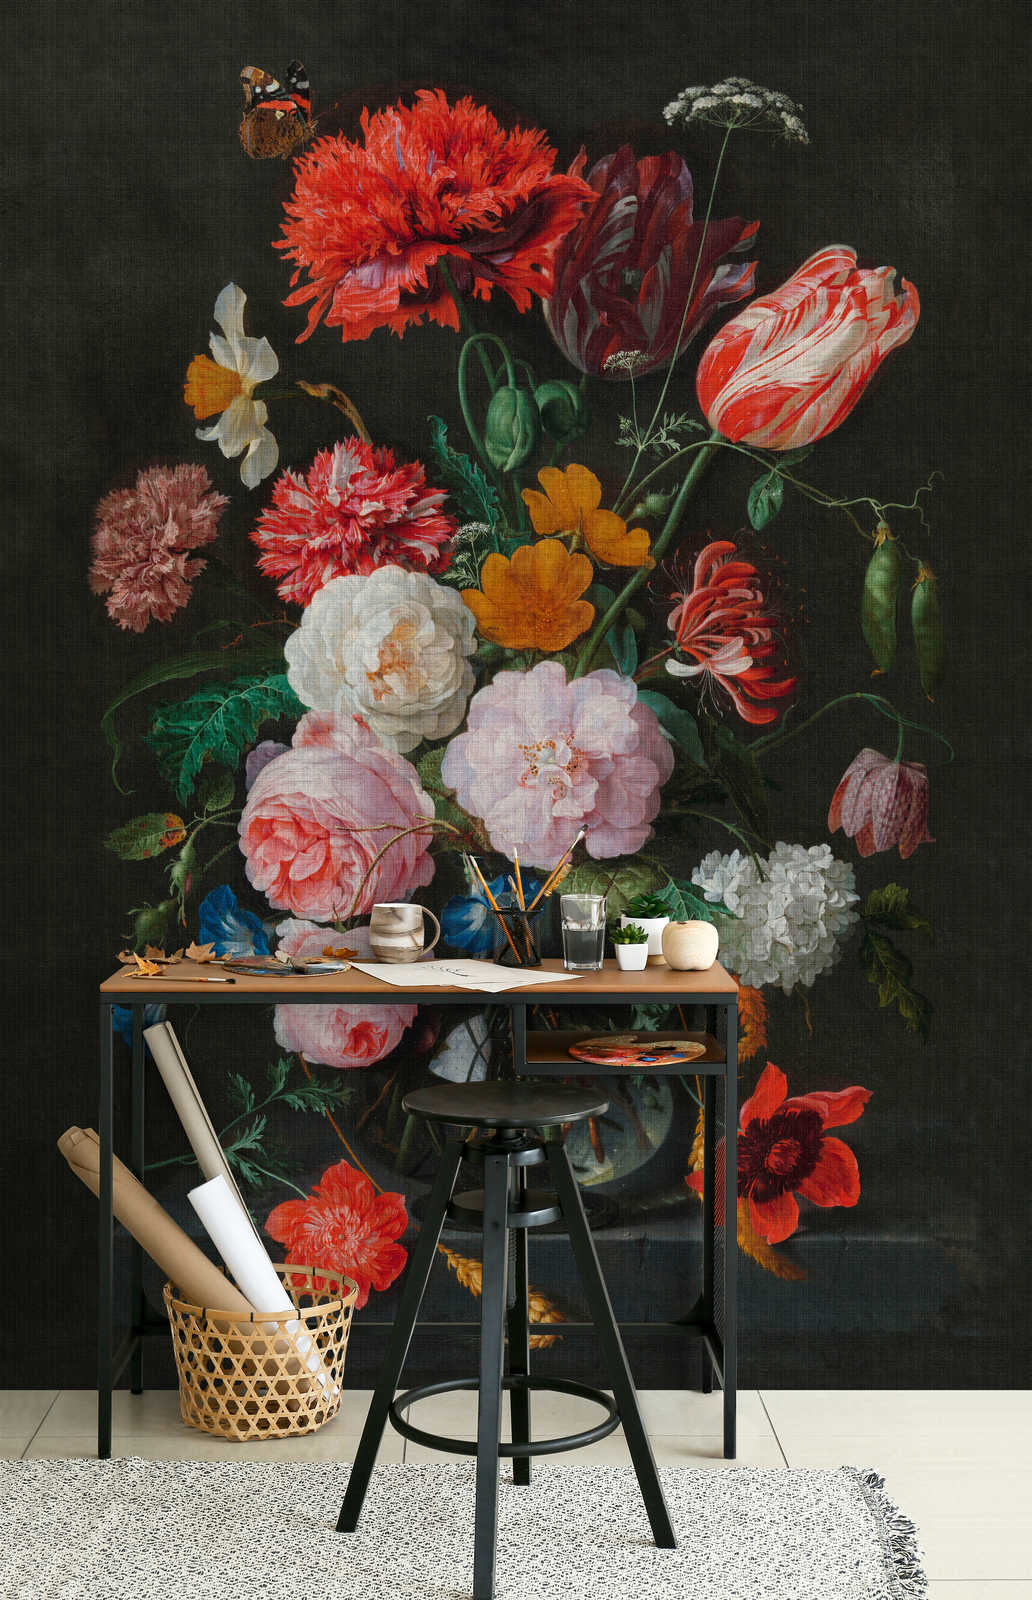             Artists Studio 4 - Photo wallpaper flowers still life with roses
        